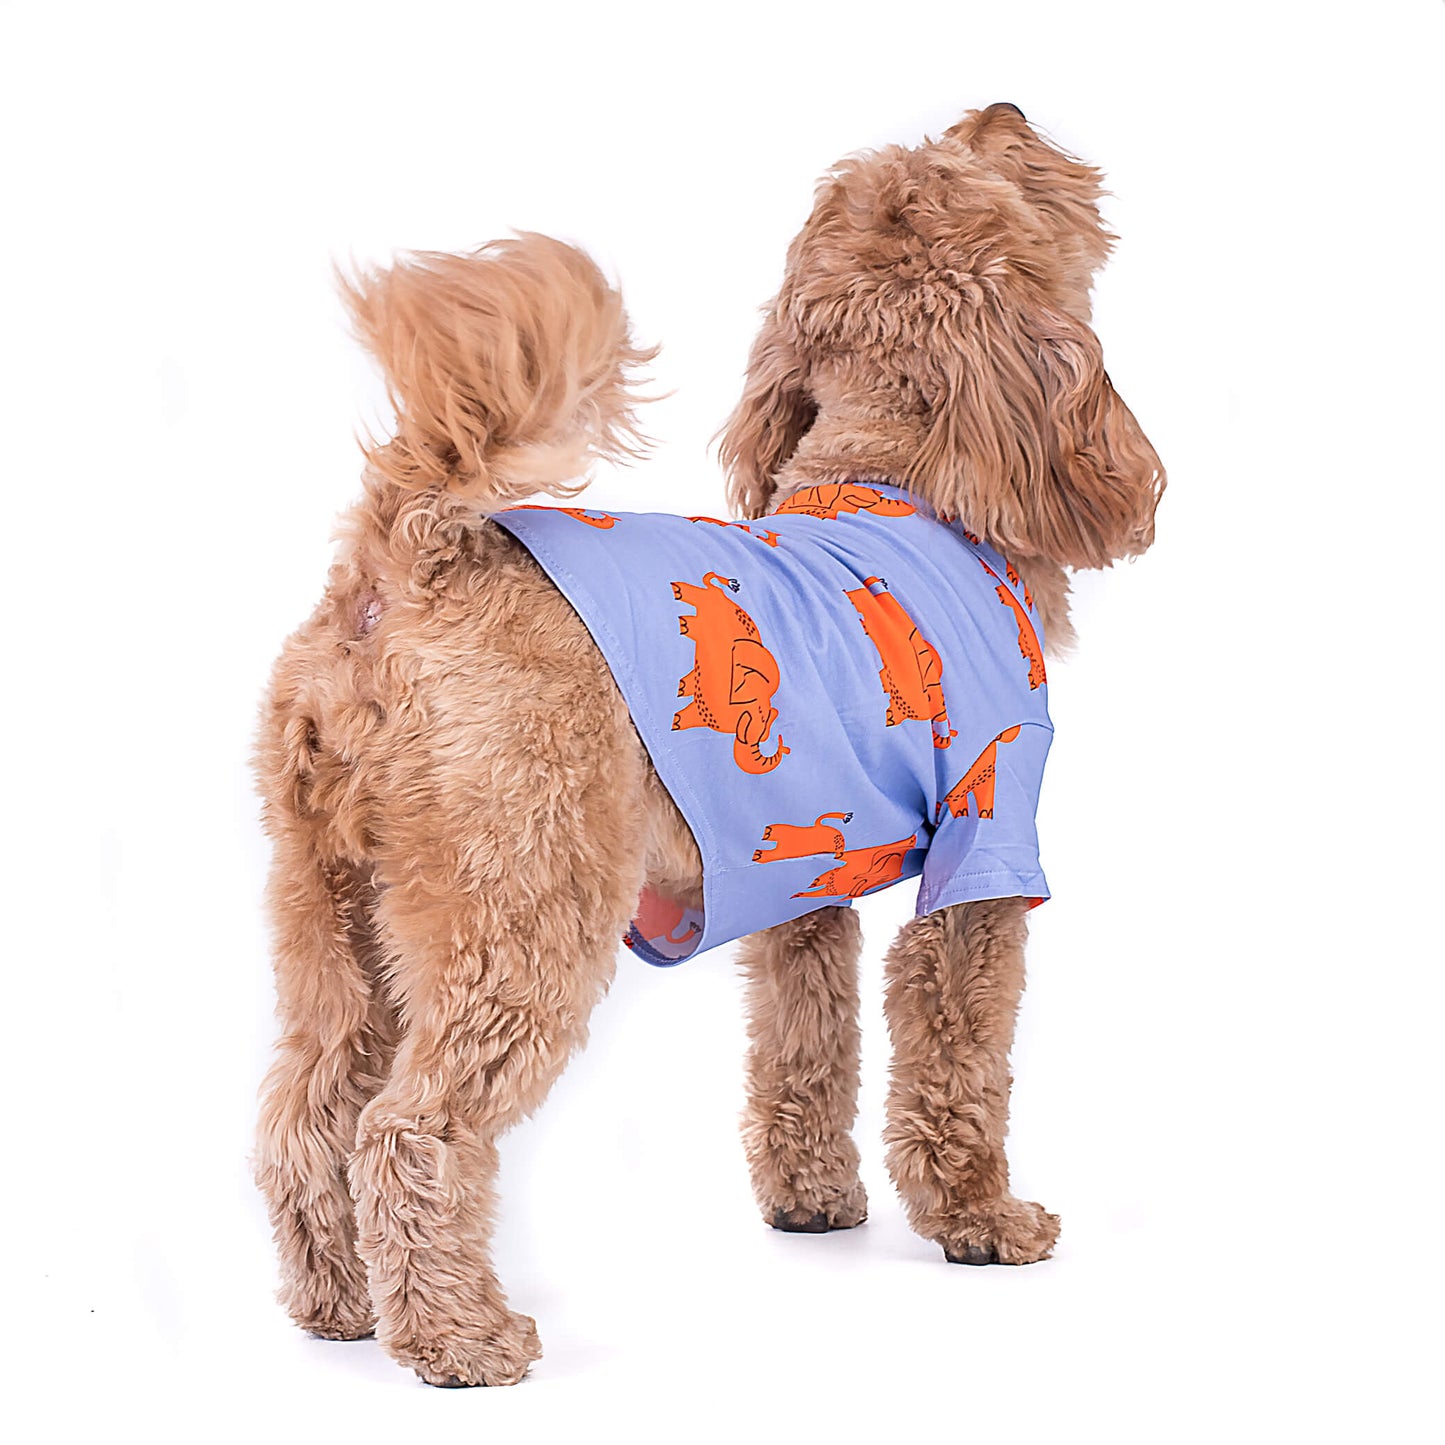 A cavoodle standing facing away. It is wearing a Lilac Vibrant Hound shirt for dogs that is printed with orange elephants.